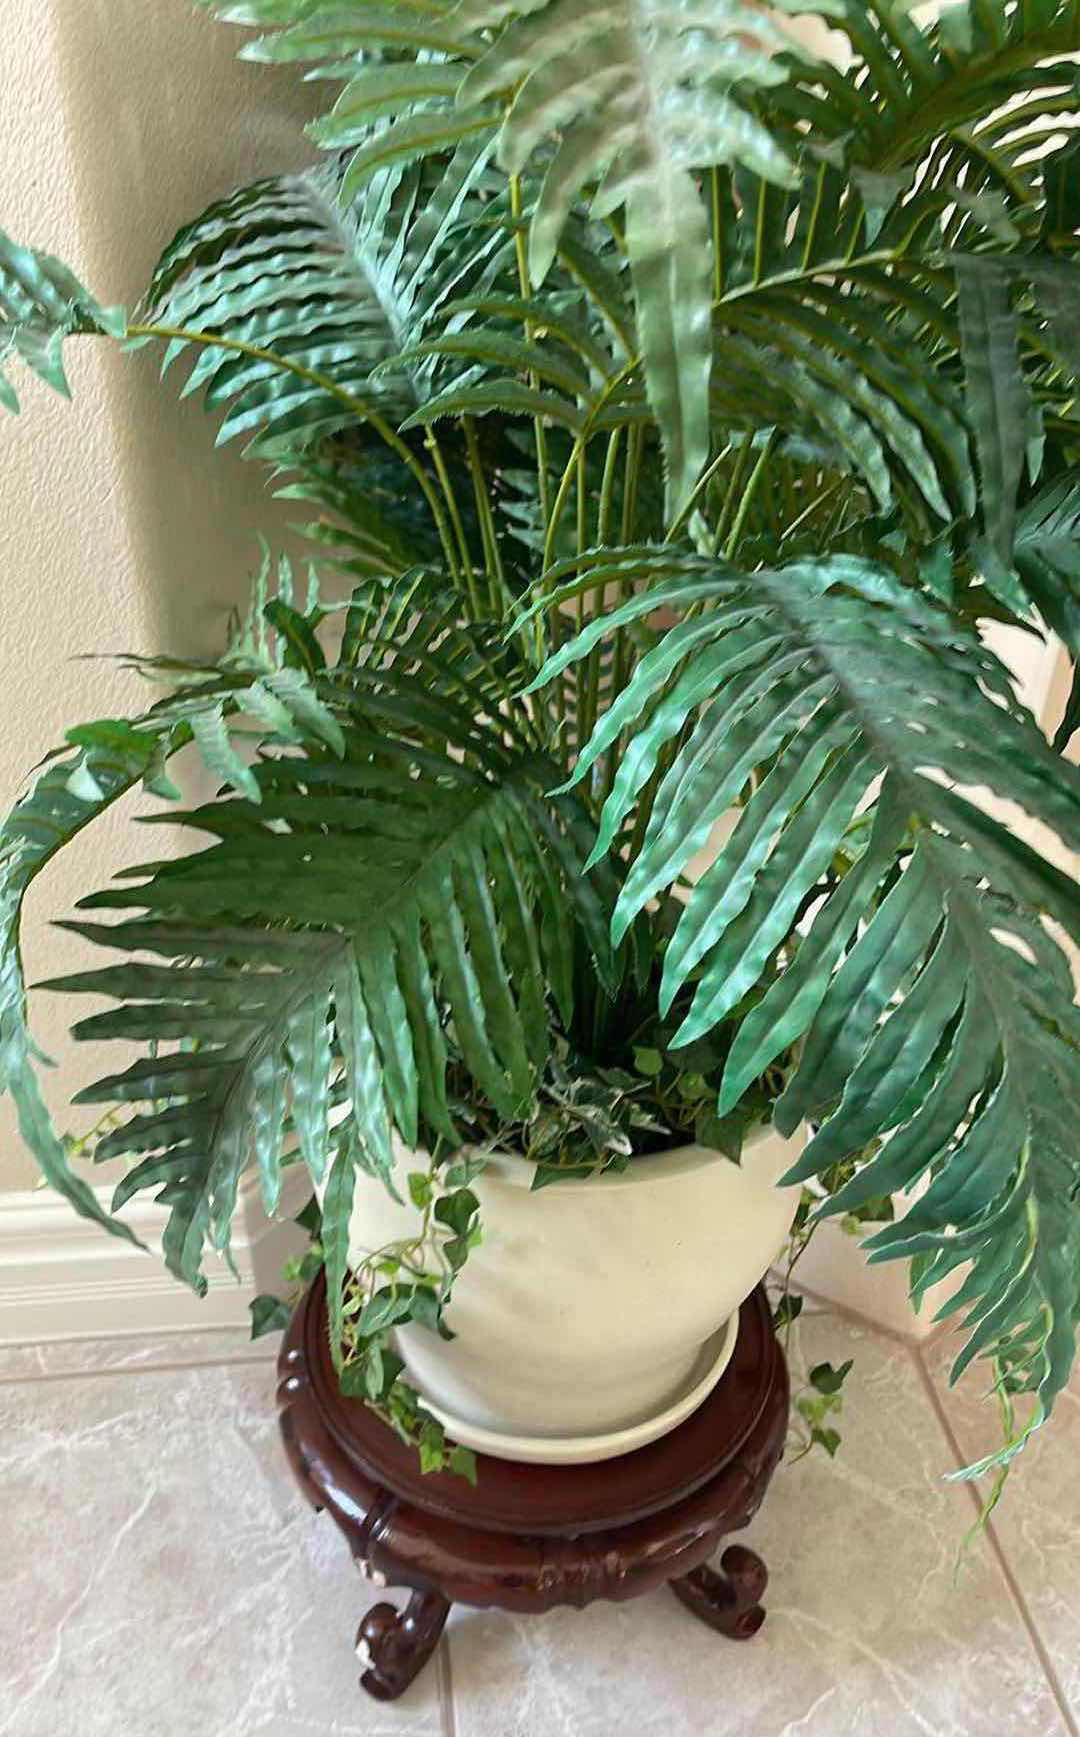 Photo 2 of ARIFICIAL 3’ PLANT/FERN VINES IN CERAMIC POT WITH WOODEN STAND